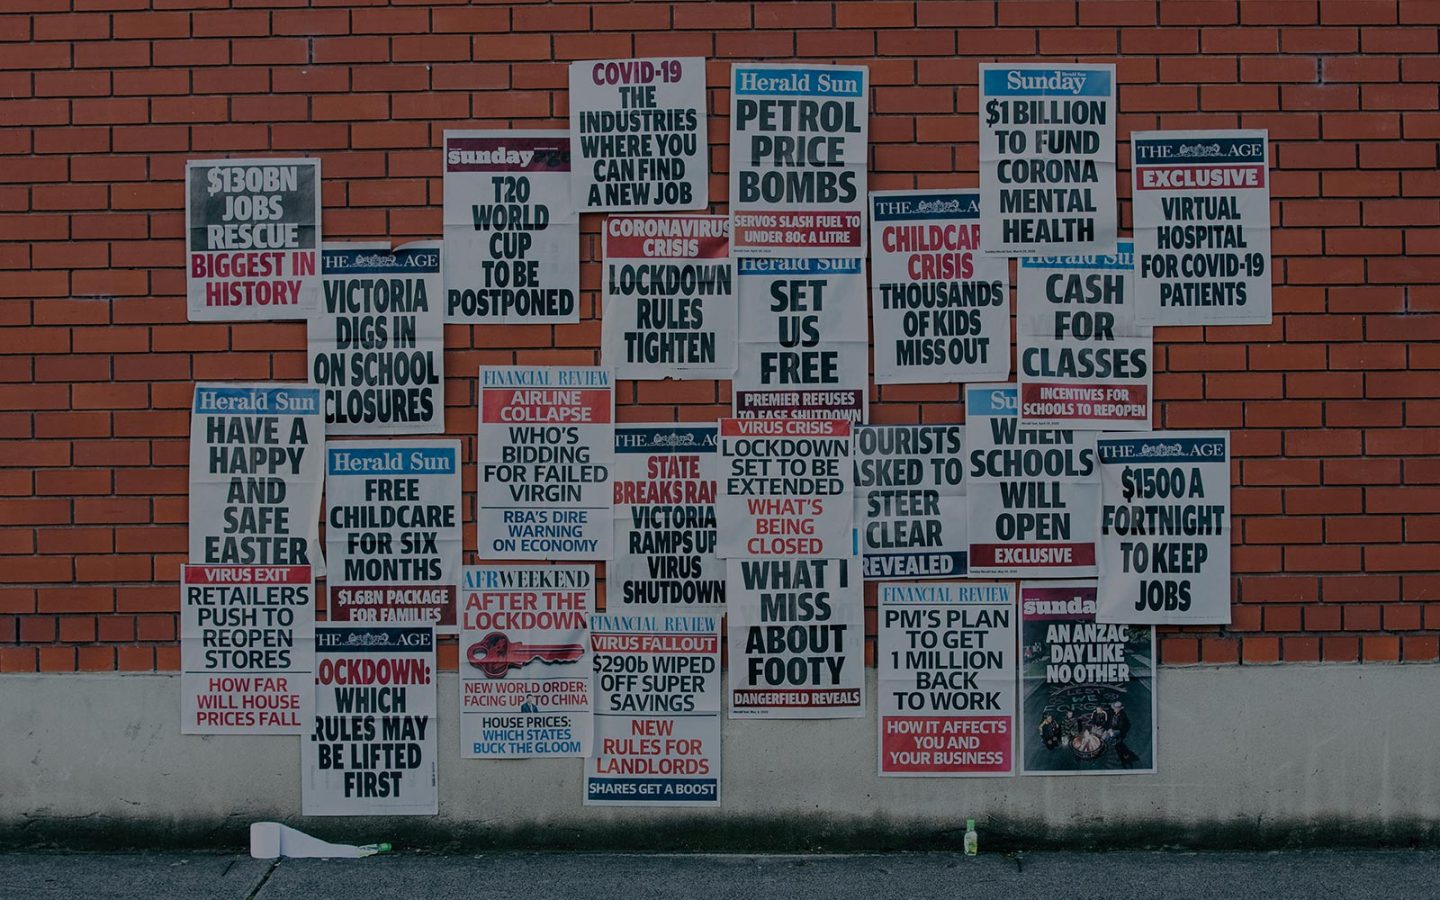 Multiple news posters on a brick wall. Headlines include 'Victoria digs in on school closures', 'What I miss about footy', 'PM's plan to get 1 million back to work' and 'Set us free'. 